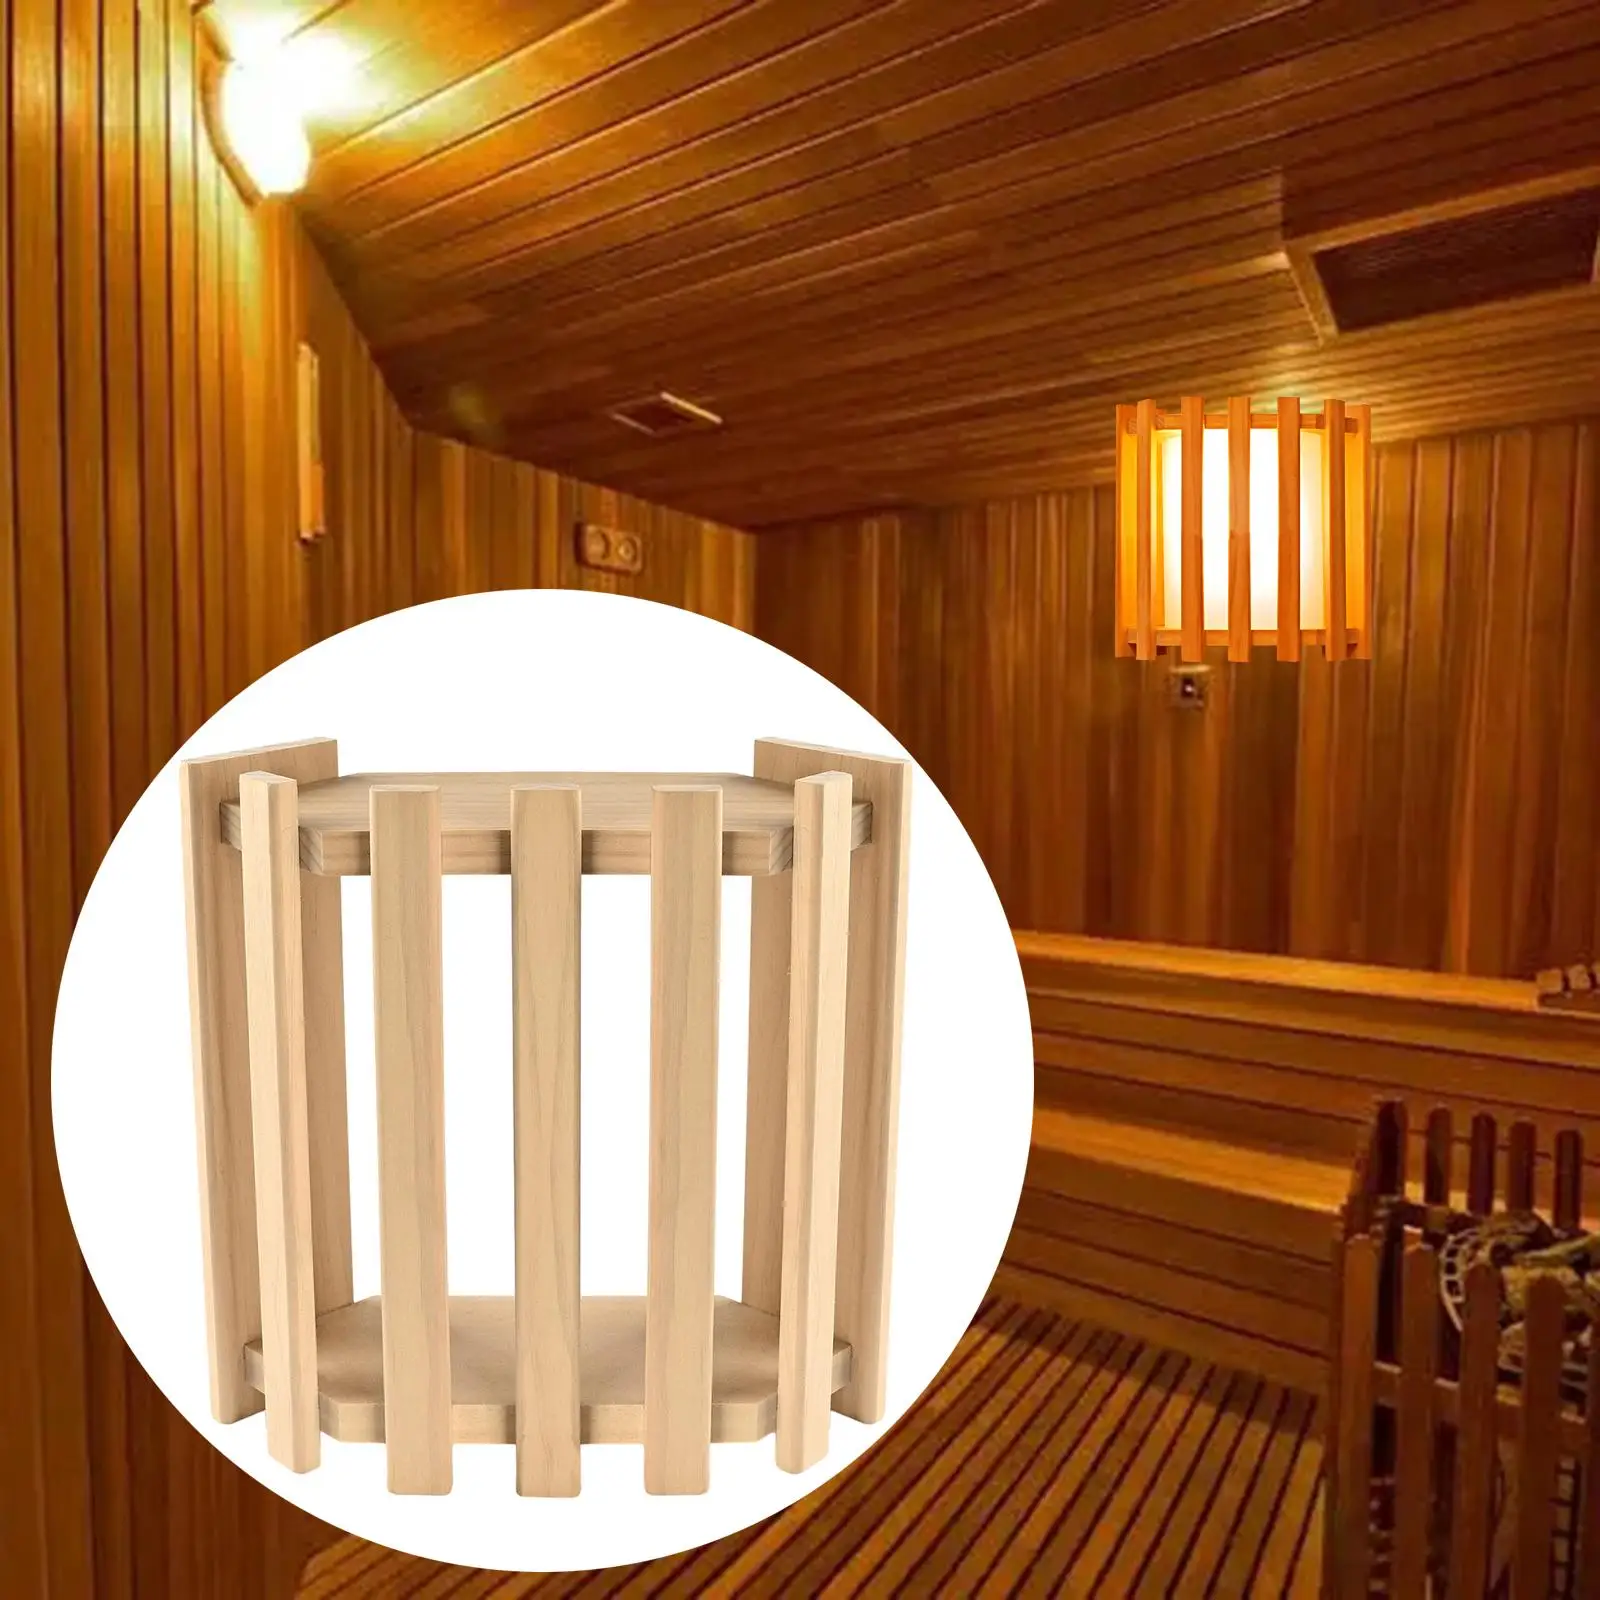 Sauna Room Lamp Shade Steam Room Accessories Steam Room Light Shade for SPA Decor Home Decoration High Temperature Sauna Rooms